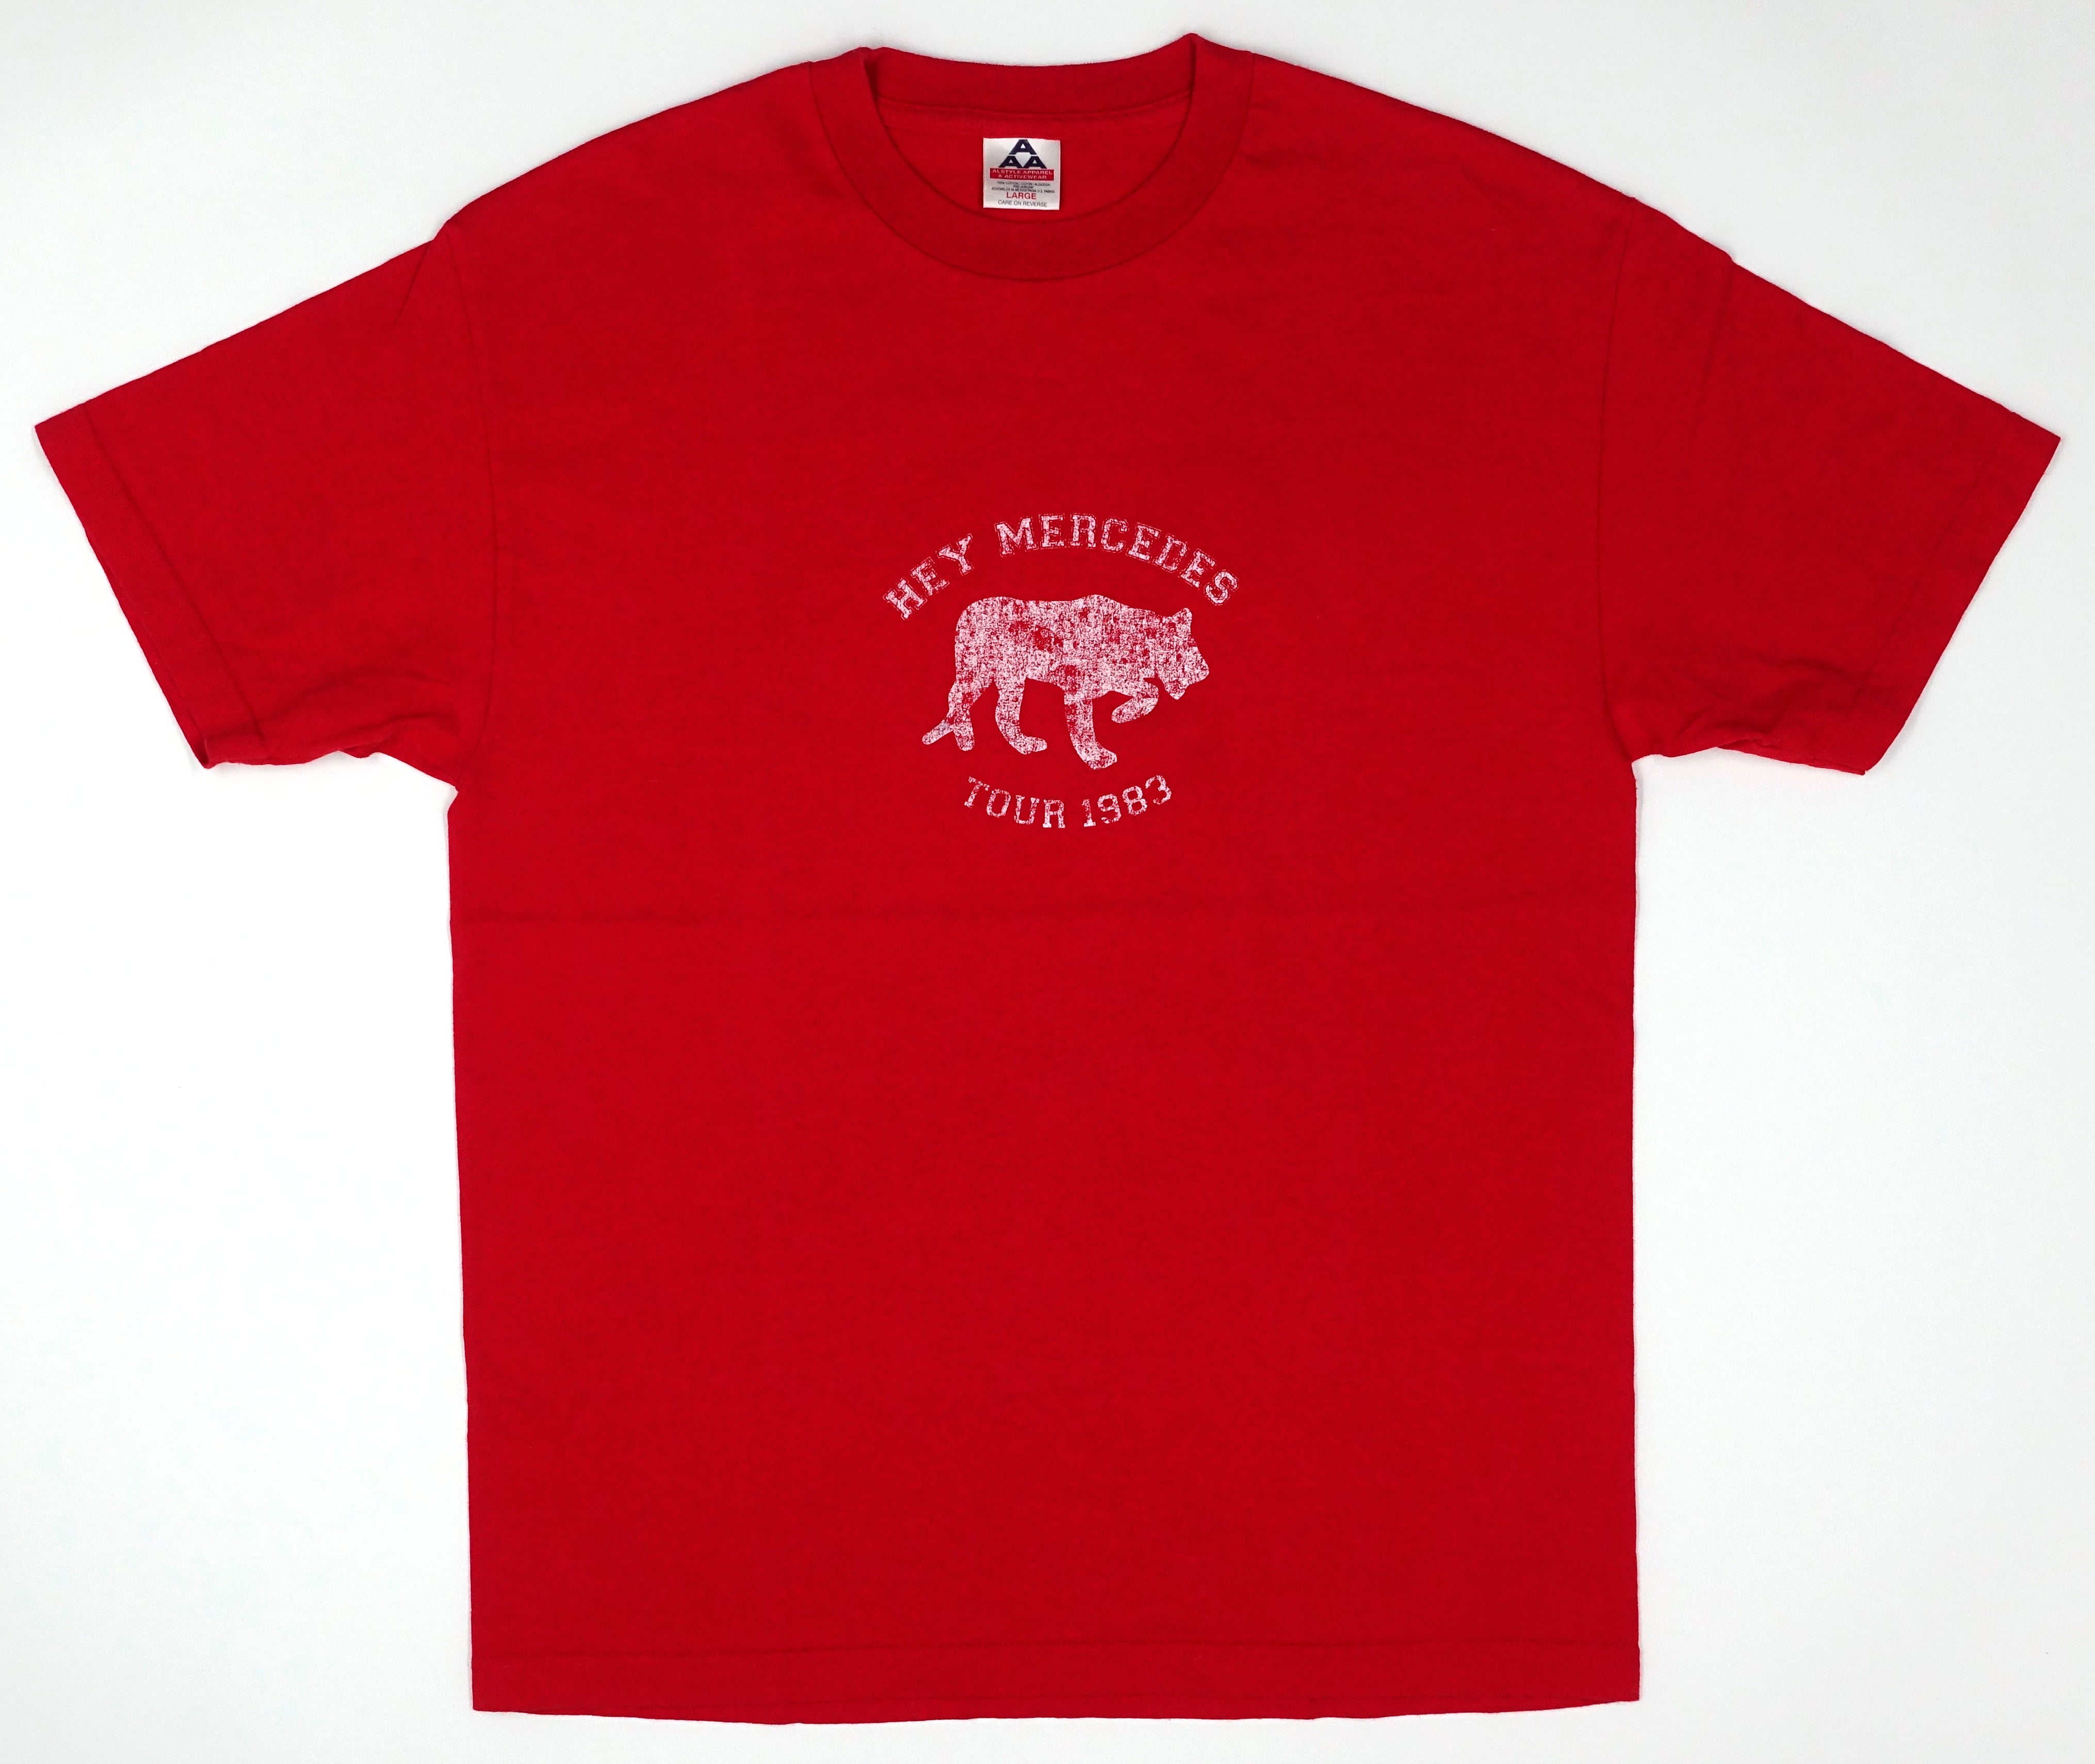 Hey Mercedes – Lion Everynight Fire Works 2001 Tour Shirt Size Large